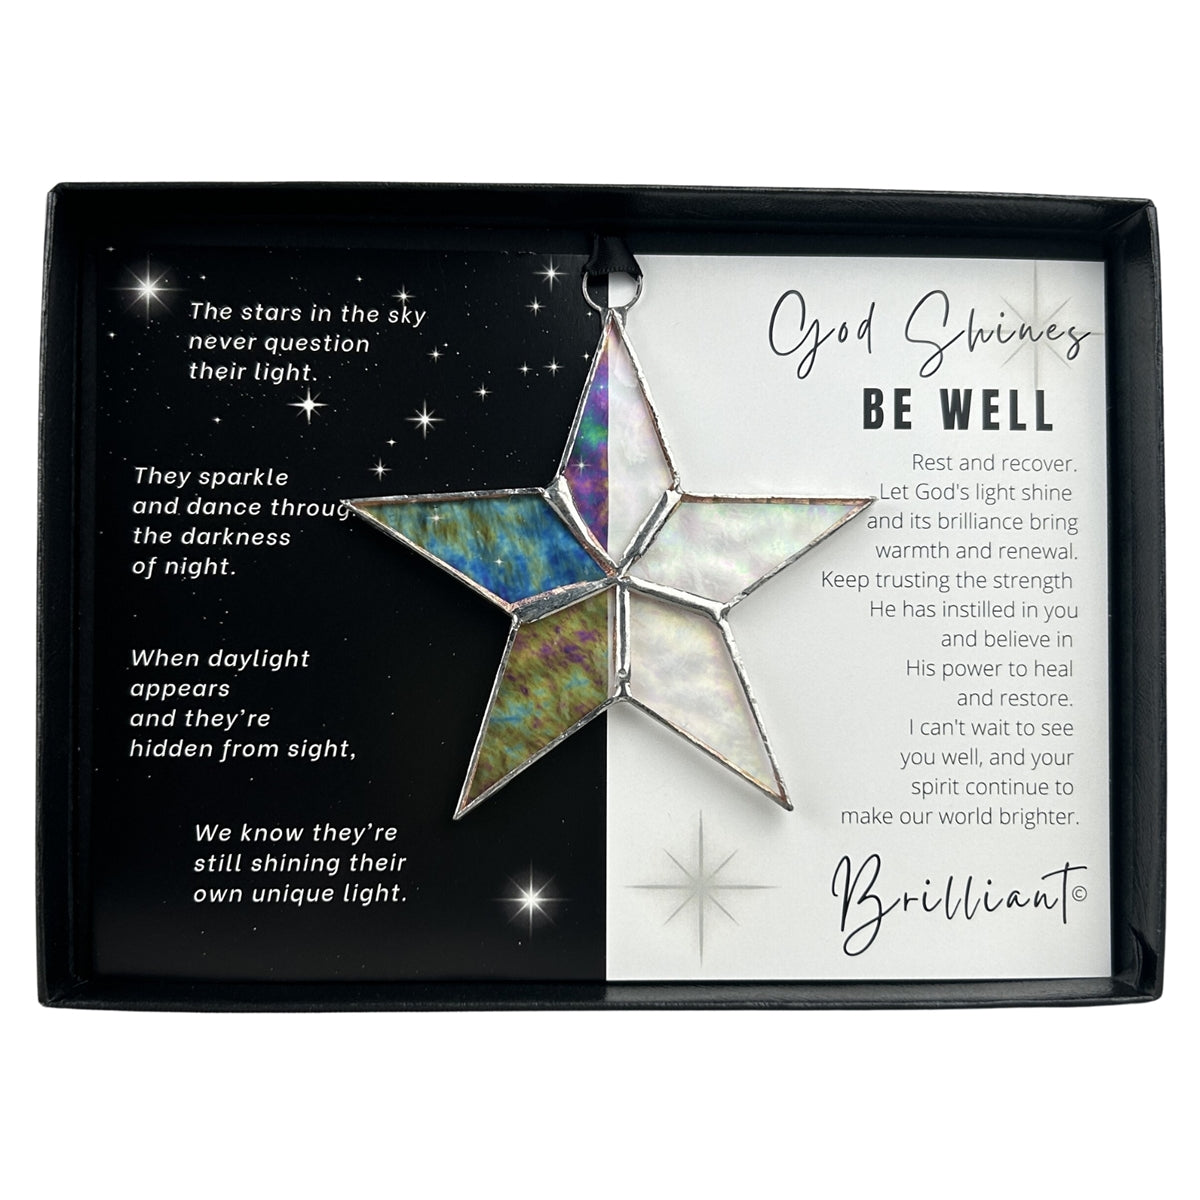 Handmade 4" clear iridescent stained glass star with silver edging, packaged with "God Shines Be Well" sentiment in black gift box with clear lid.